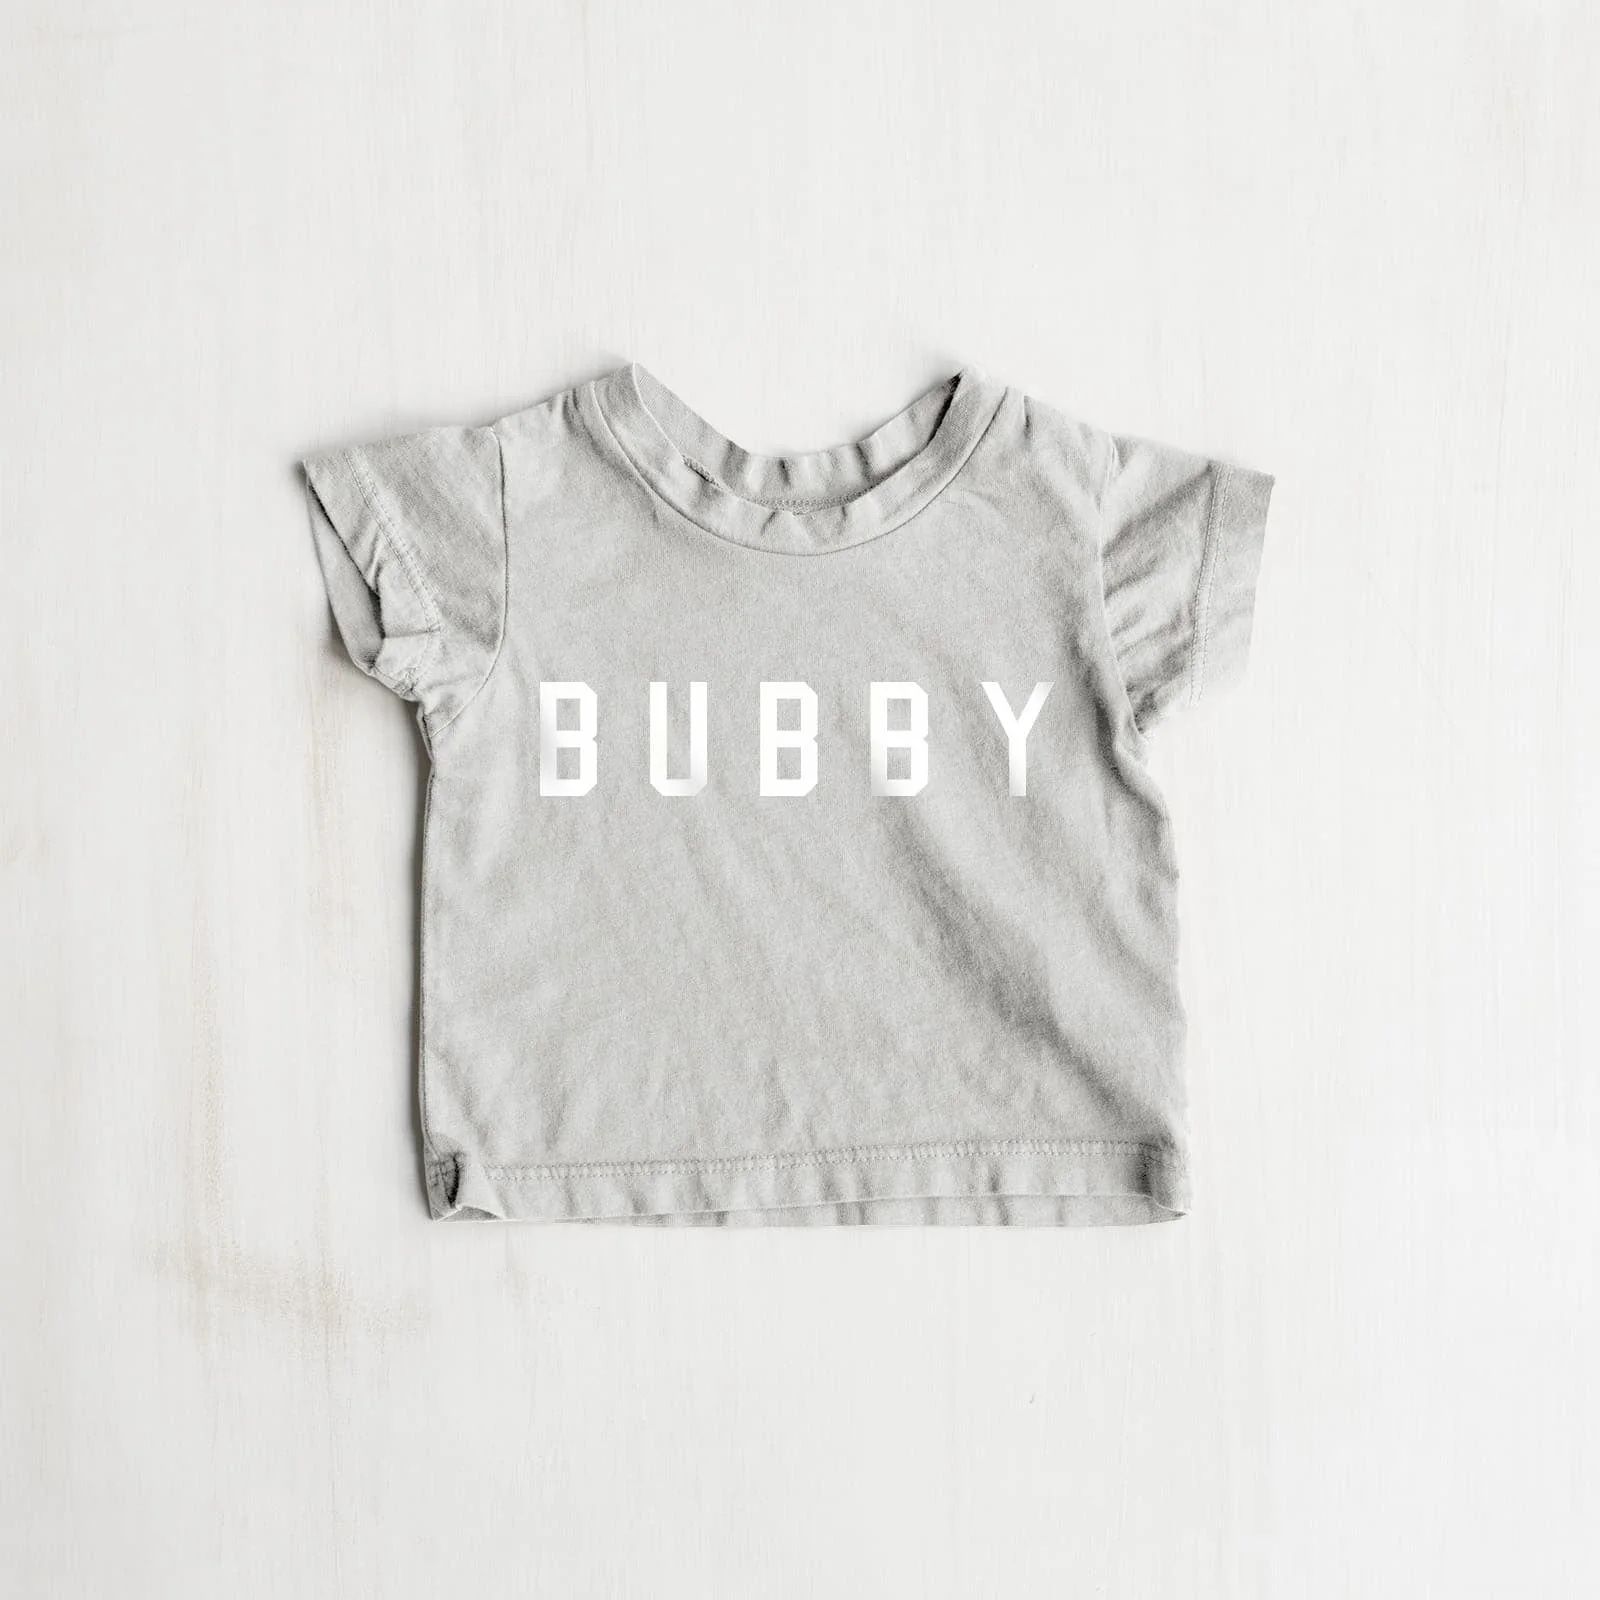 Kids Bubby Boys Tee in Grey - Ford And Wyatt | Ford and Wyatt